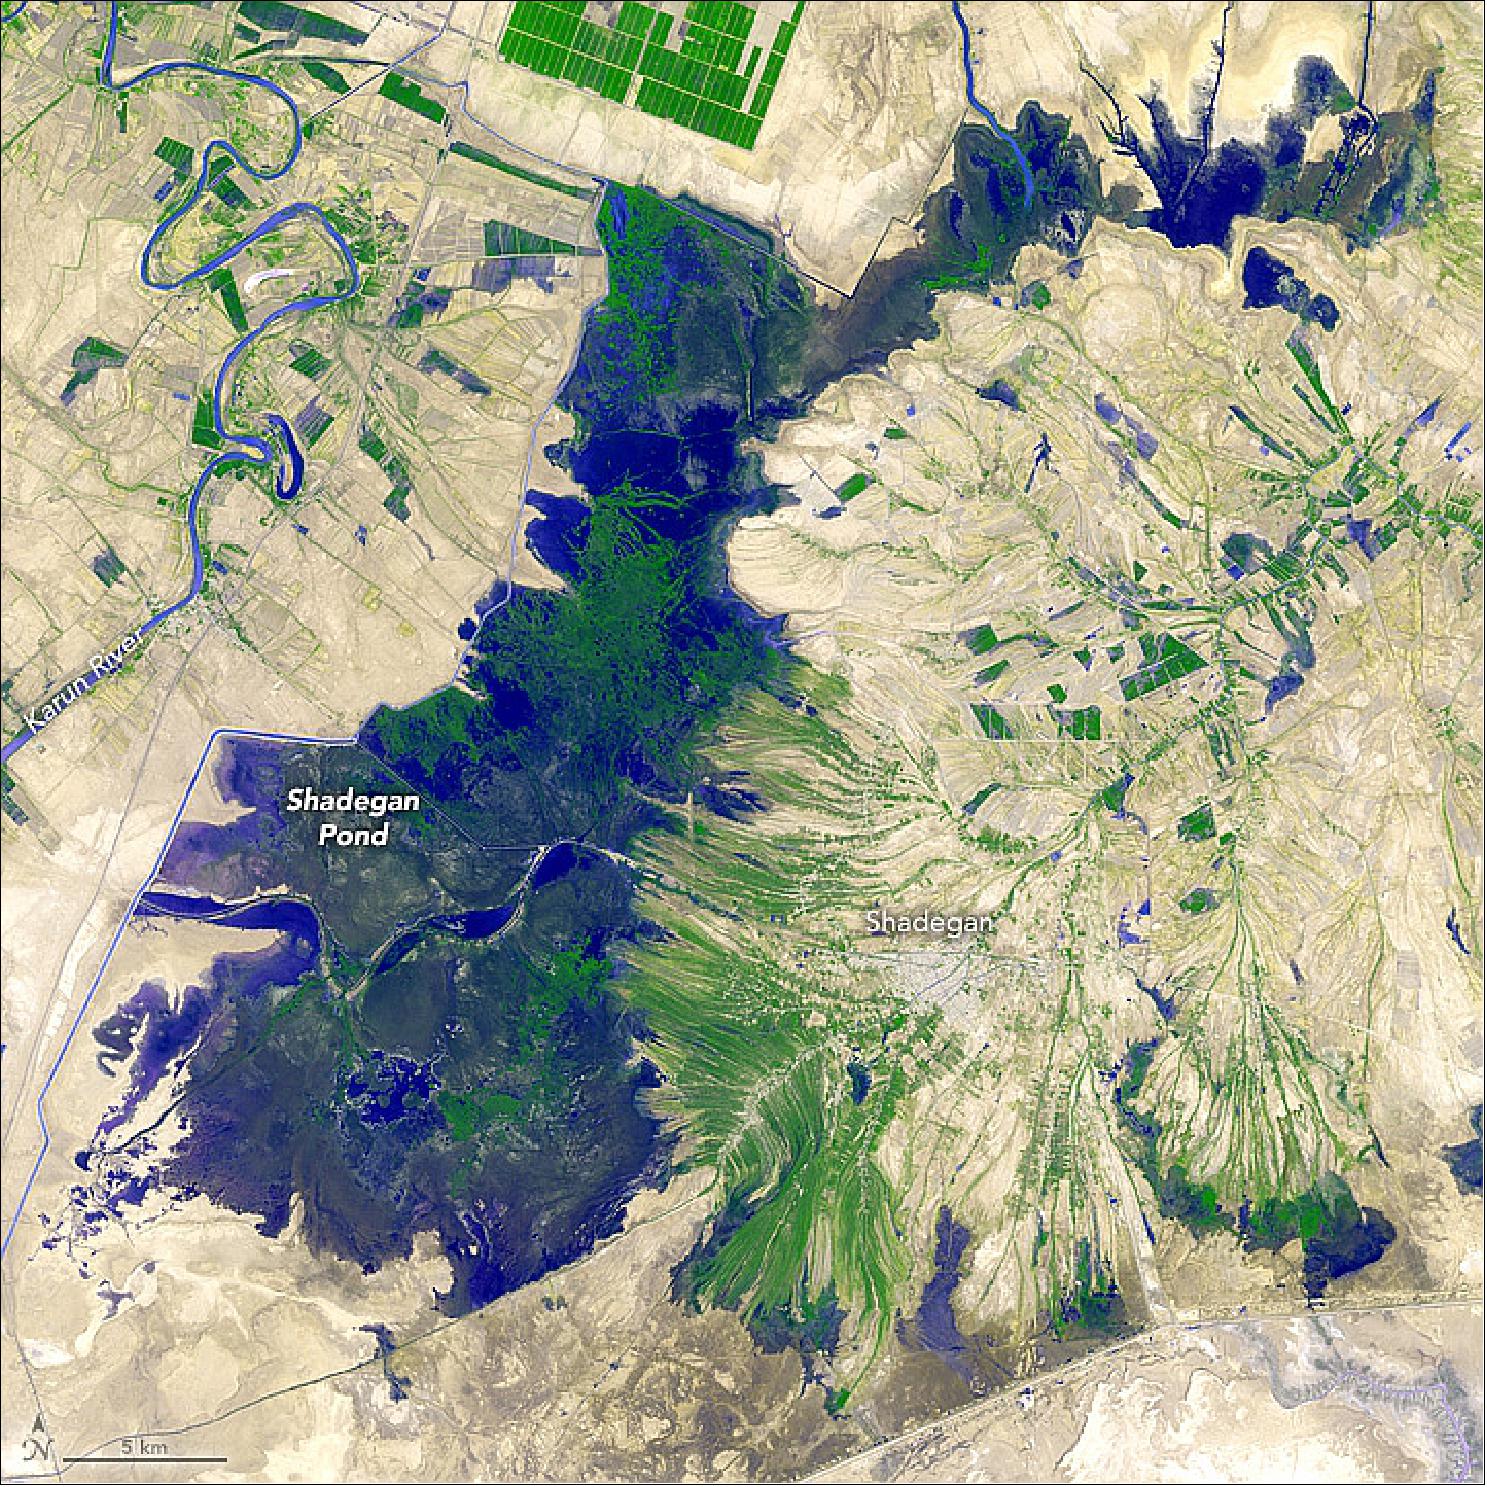 Figure 75: Image of the Shadegan Pond in Iran, acquired on September 3, 2012 with the ASTER (Advanced Spaceborne Thermal Emission and Reflection Radiometer) of JAXA on the NASA's Terra satellite (image credit: NASA Earth Observatory image by Jesse Allen, caption by Adam Voiland)